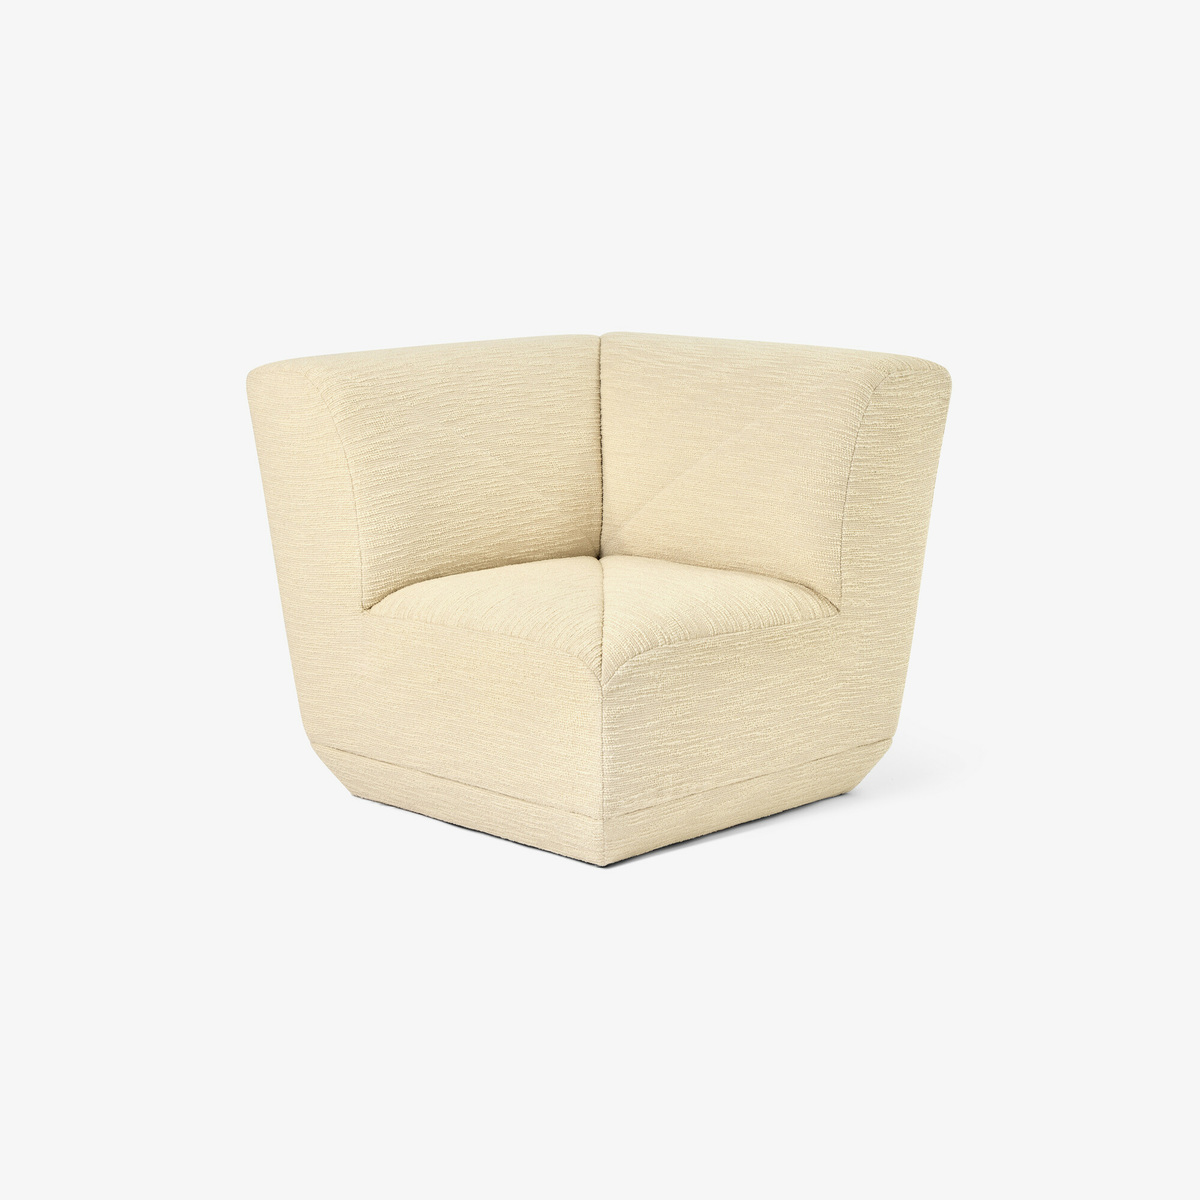 Chill Corner Armchair, Off-White - Curl fabric - image 1